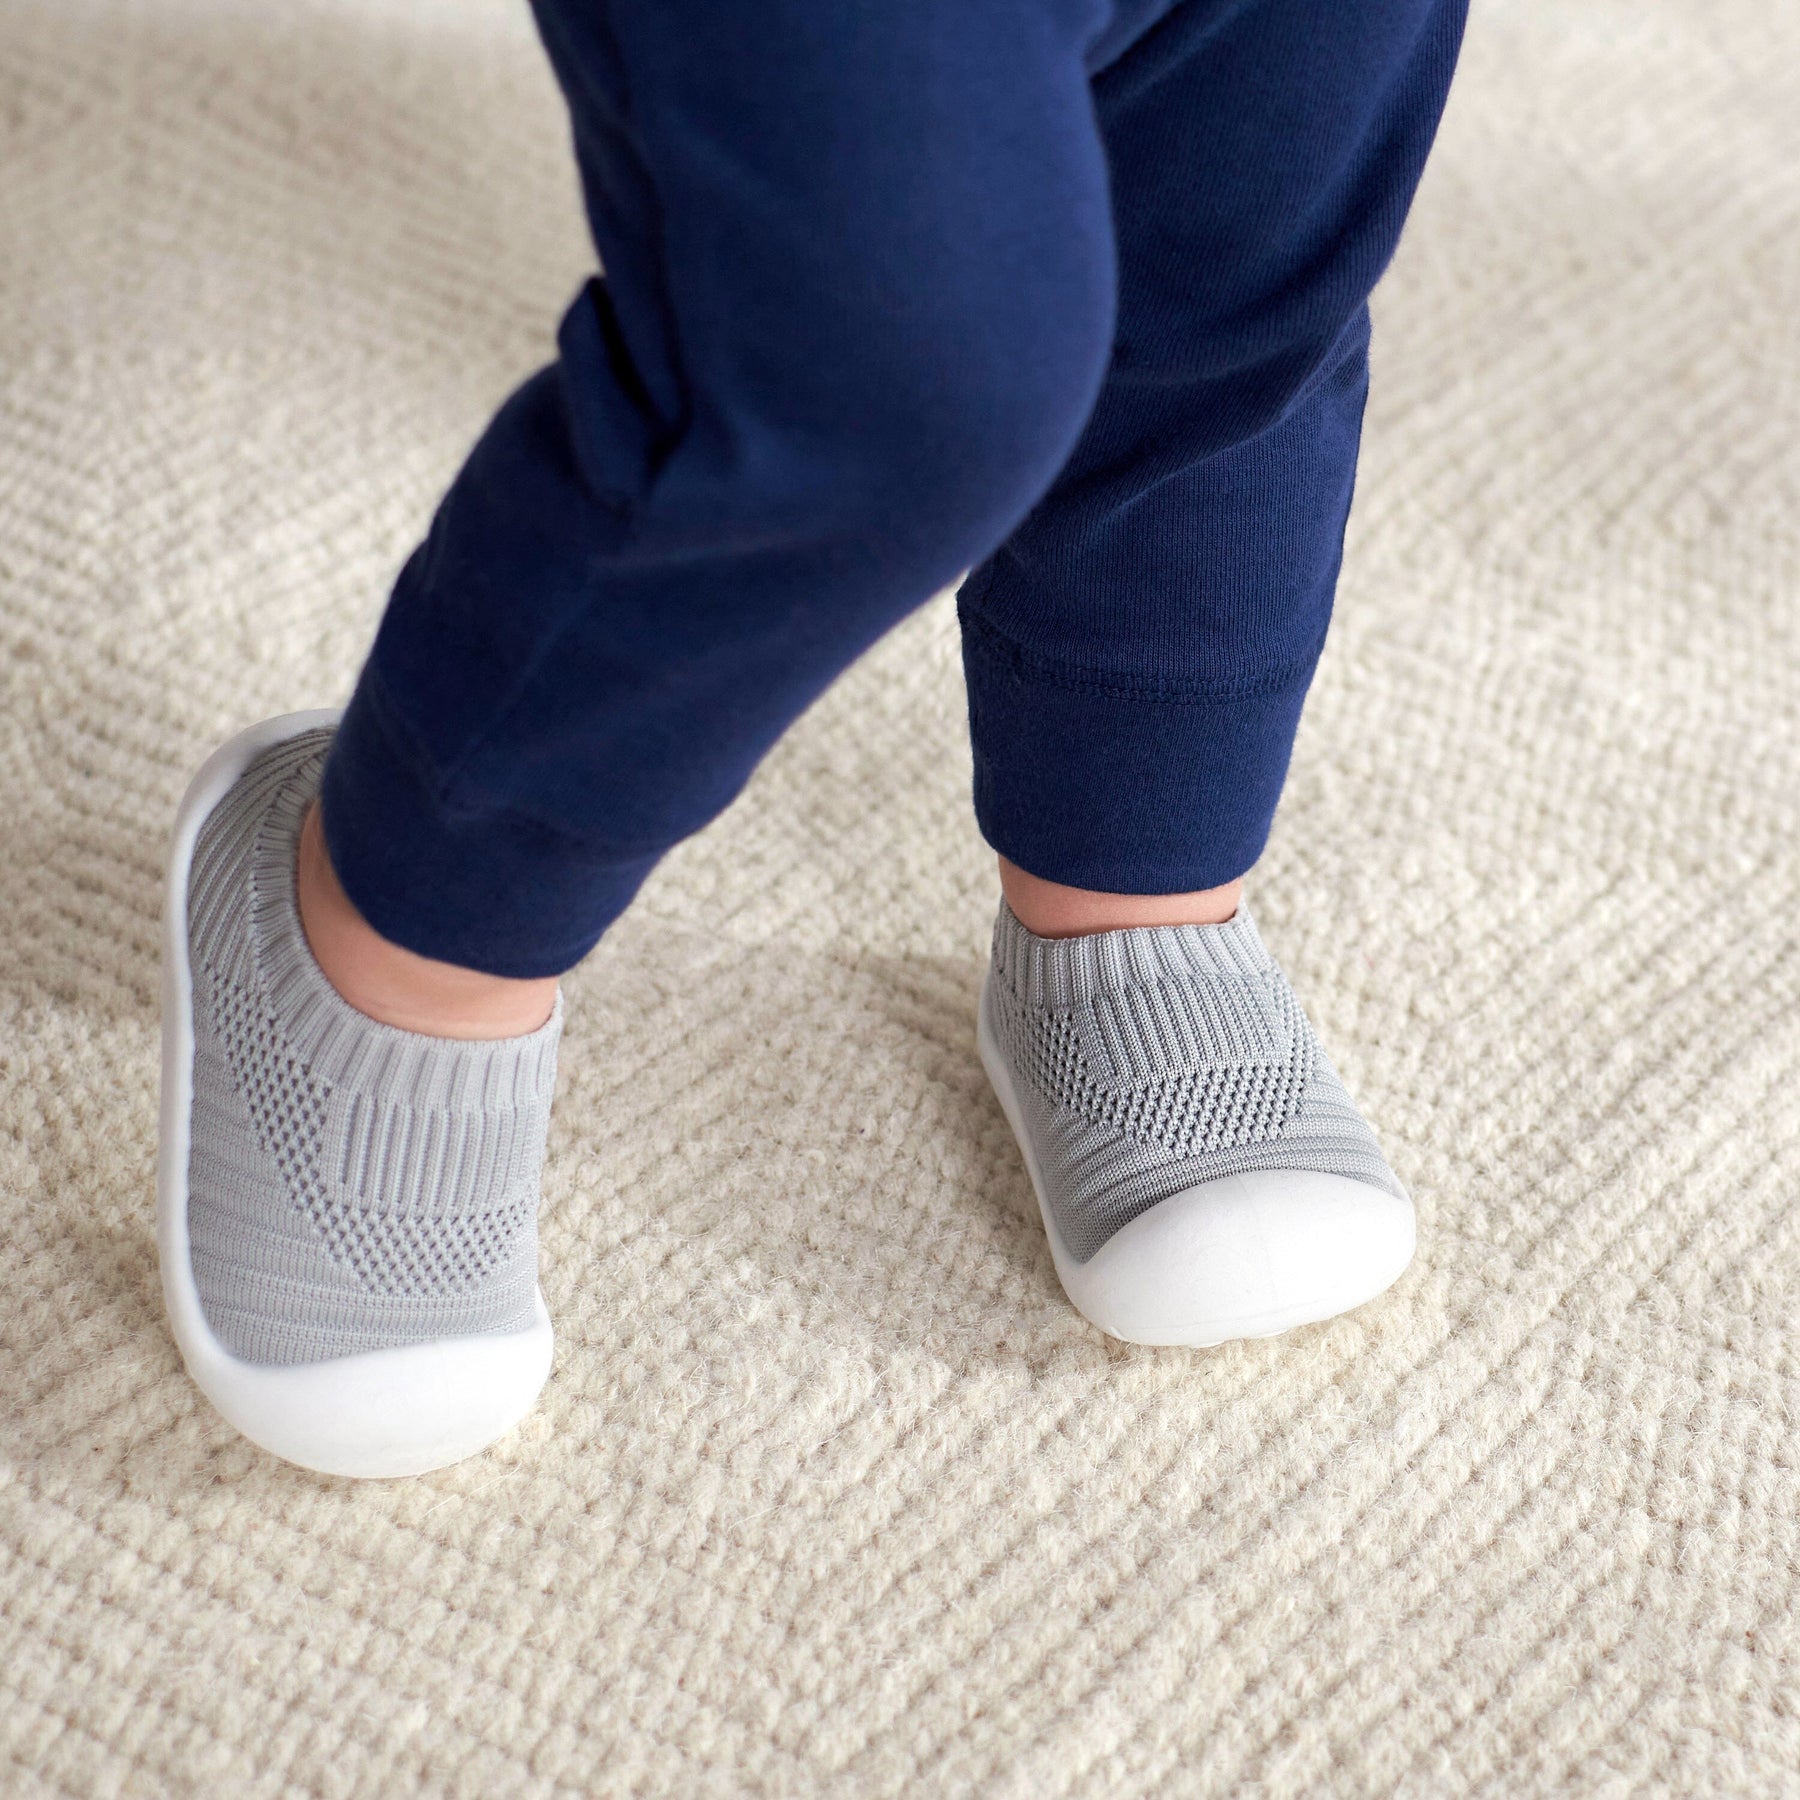 Grey Knitted Baby Non-Slip Sock Shoes